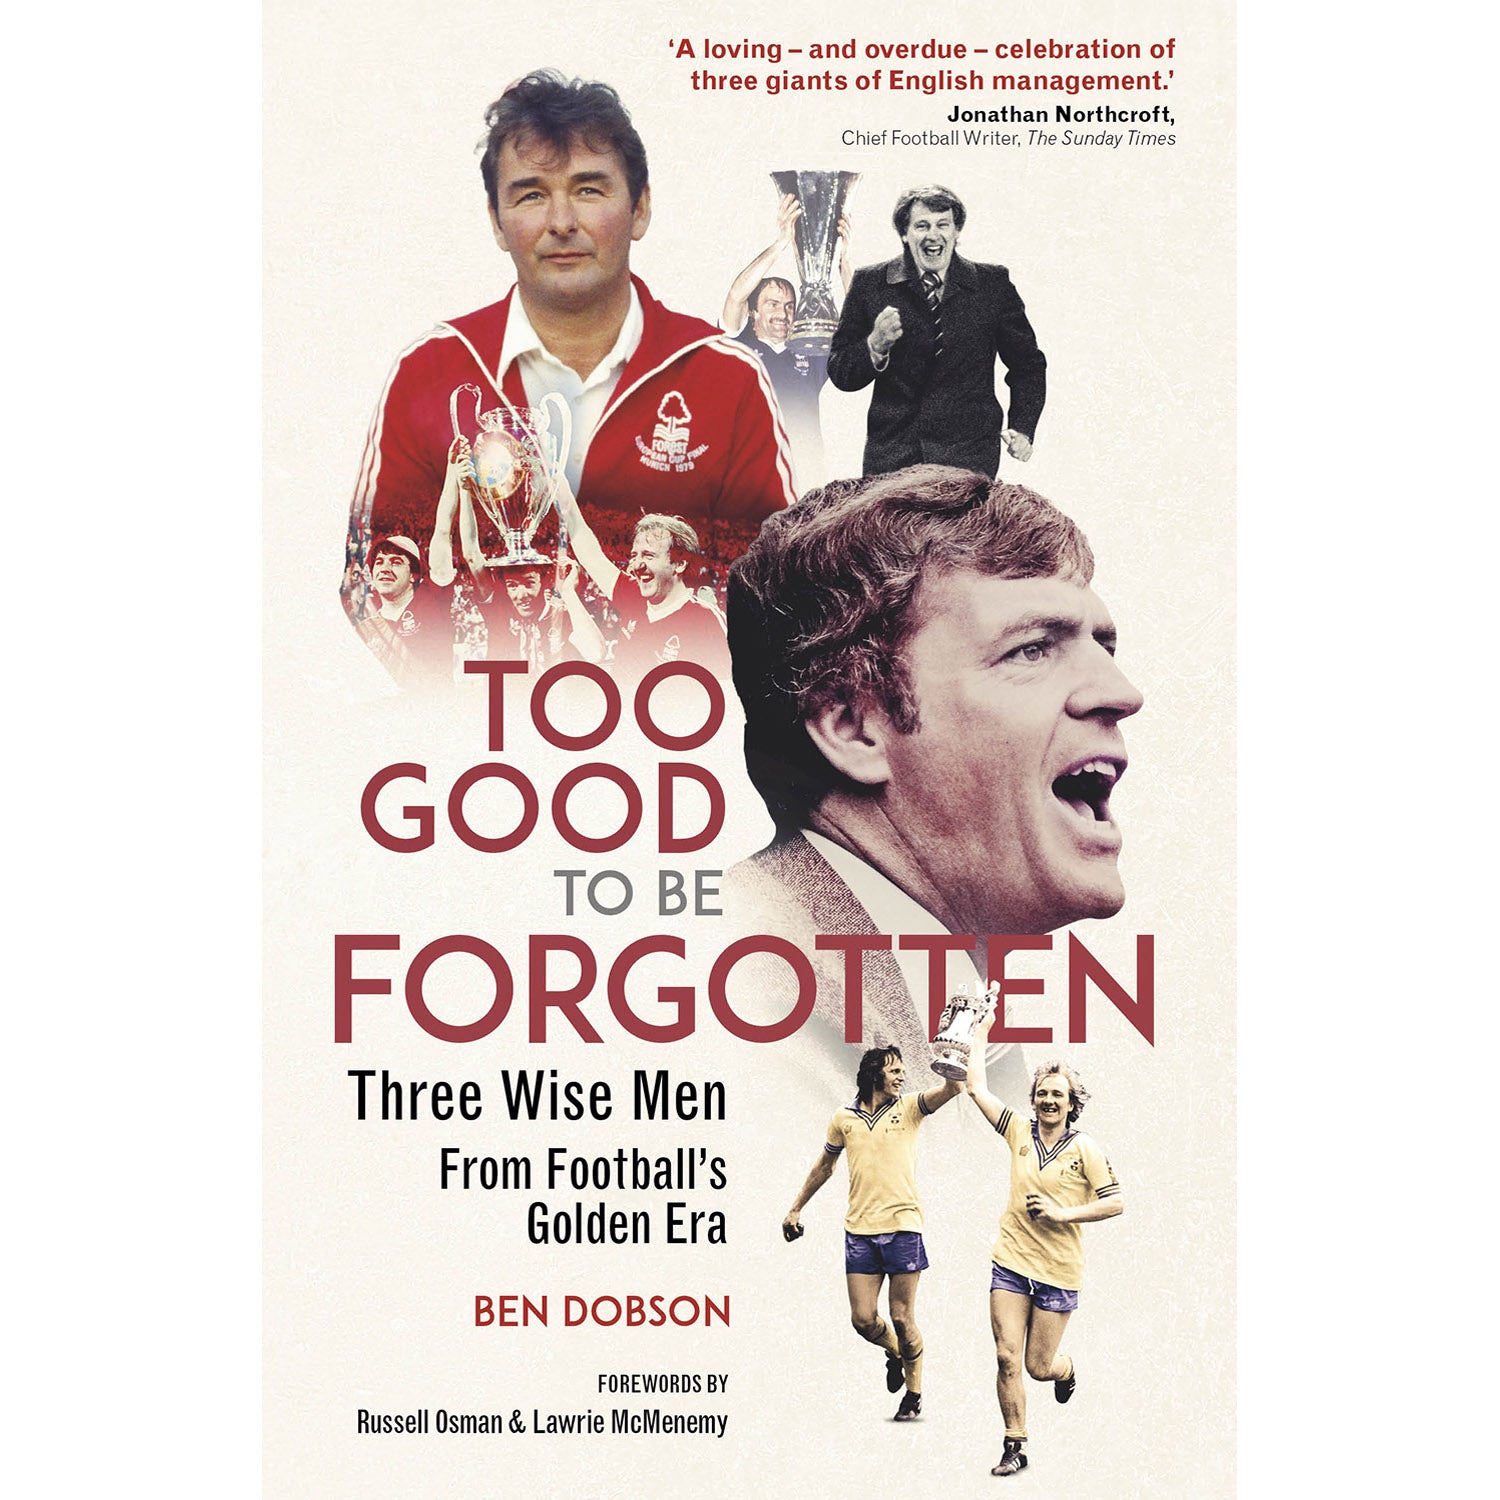 Too Good to be Forgotten – Three Wise Men From Football's Golden Era